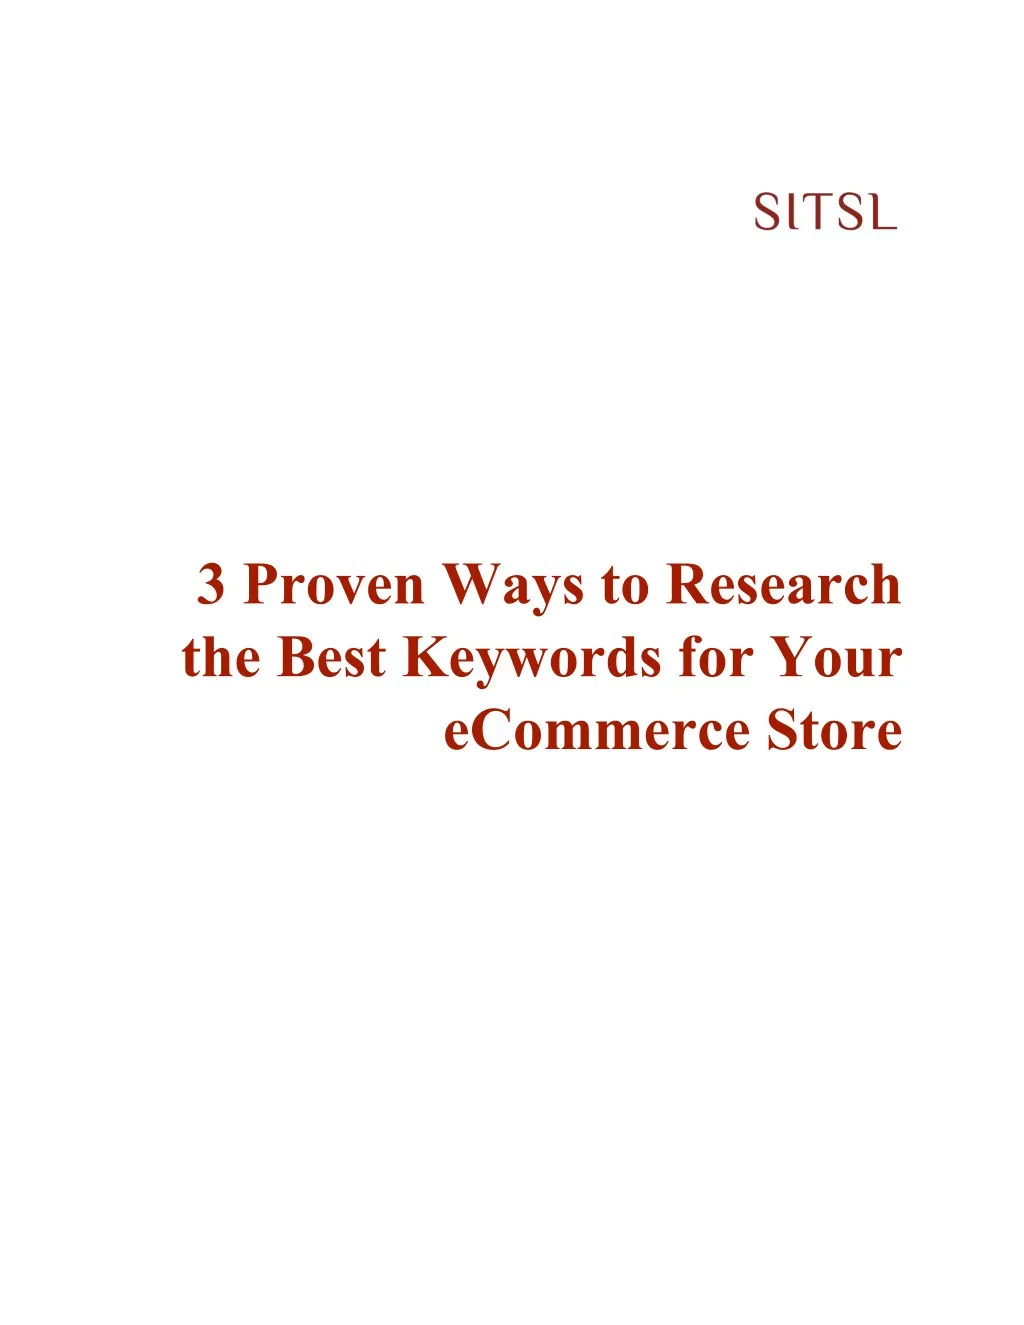 3 proven ways to research the best keywords